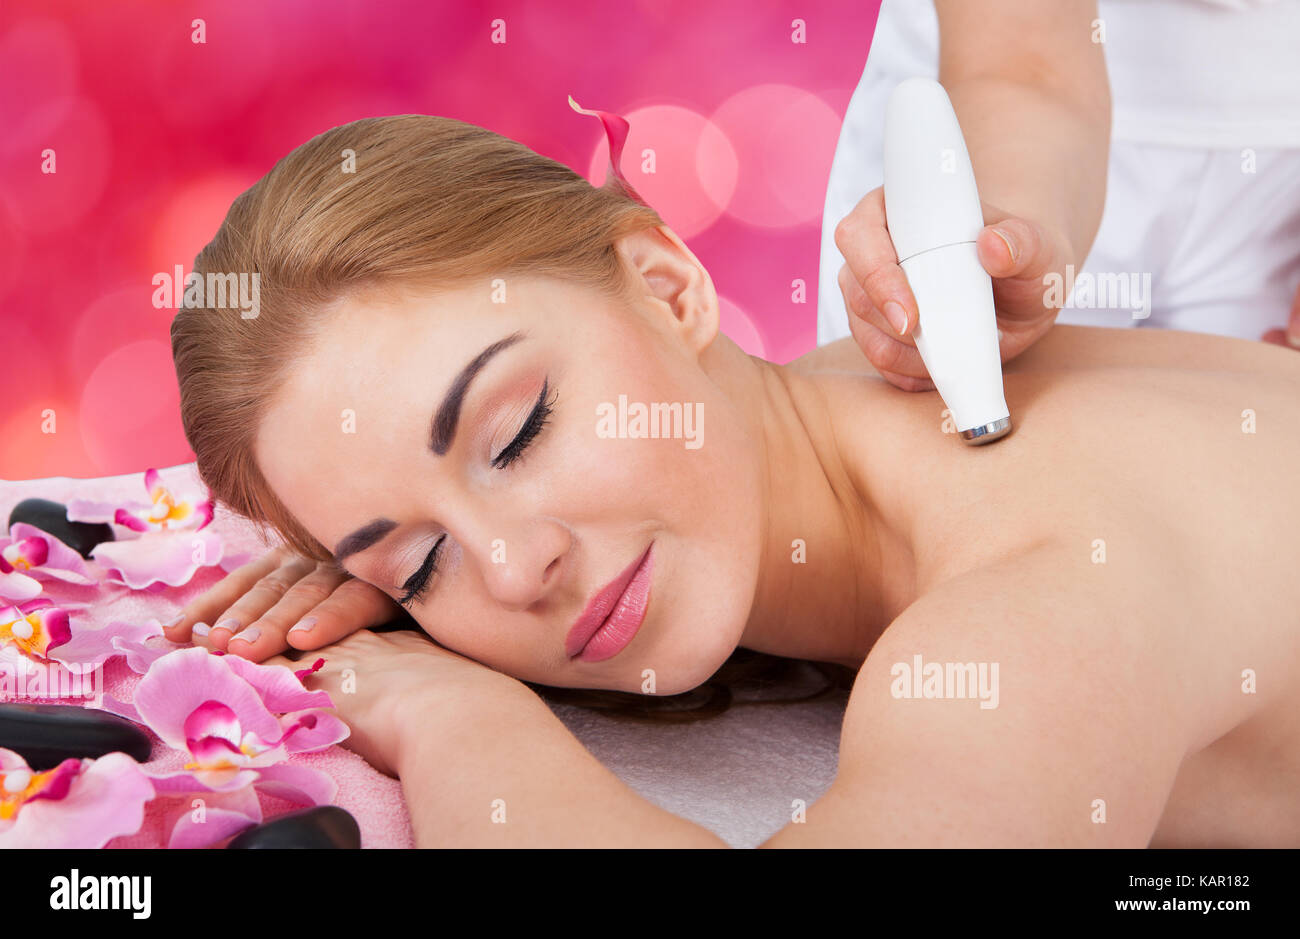 Relaxed young woman receiving microdermabrasion therapy at beauty spa Stock Photo